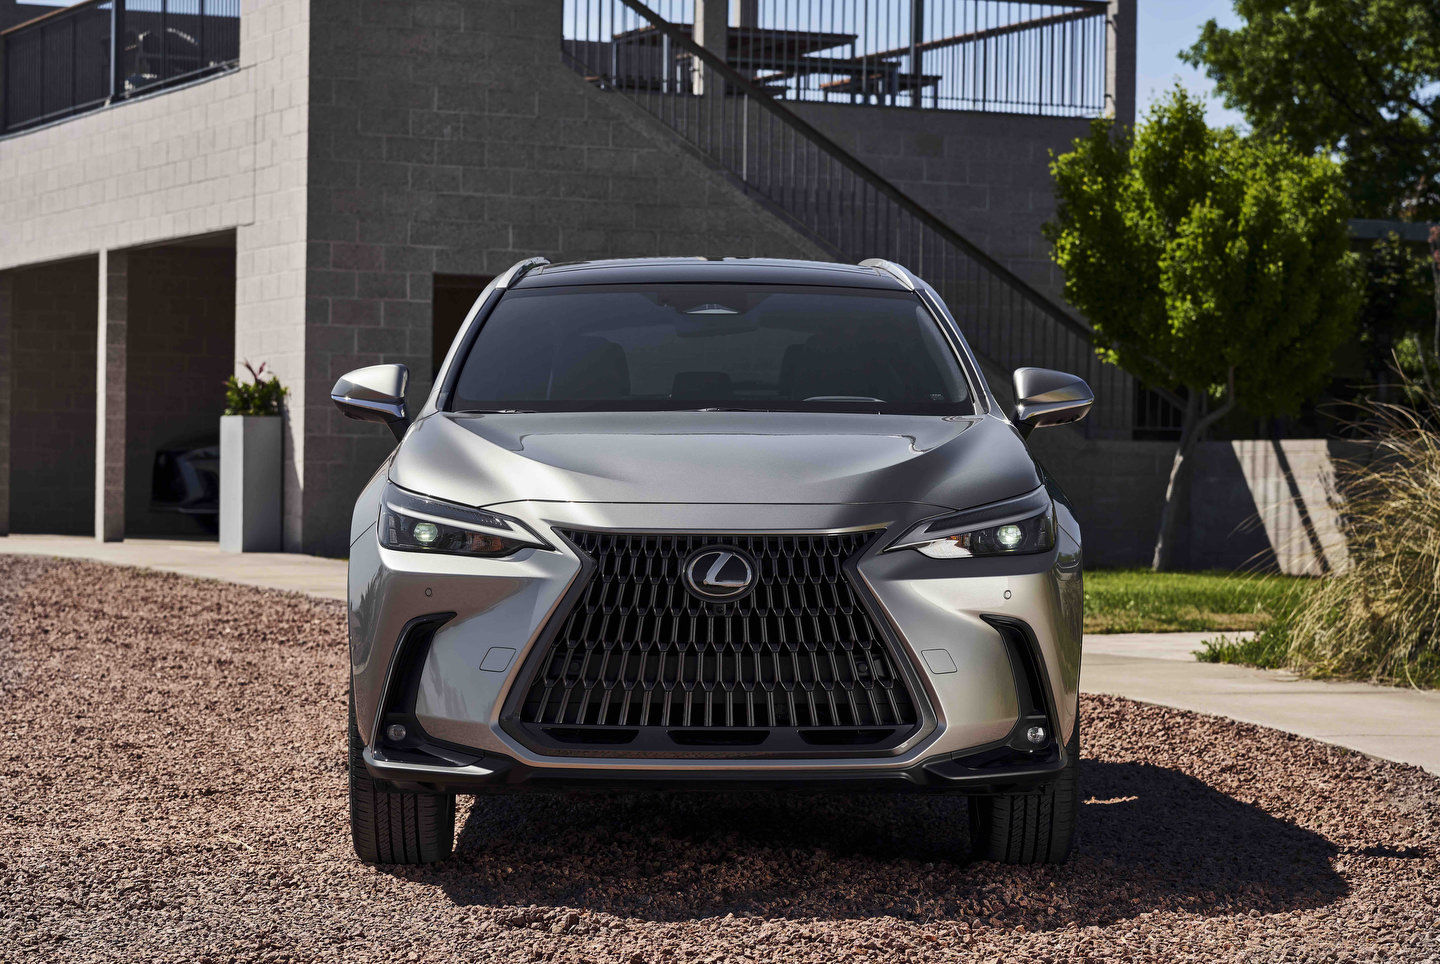 Comparing the 2023 Lexus NX and the 2023 Lexus UX